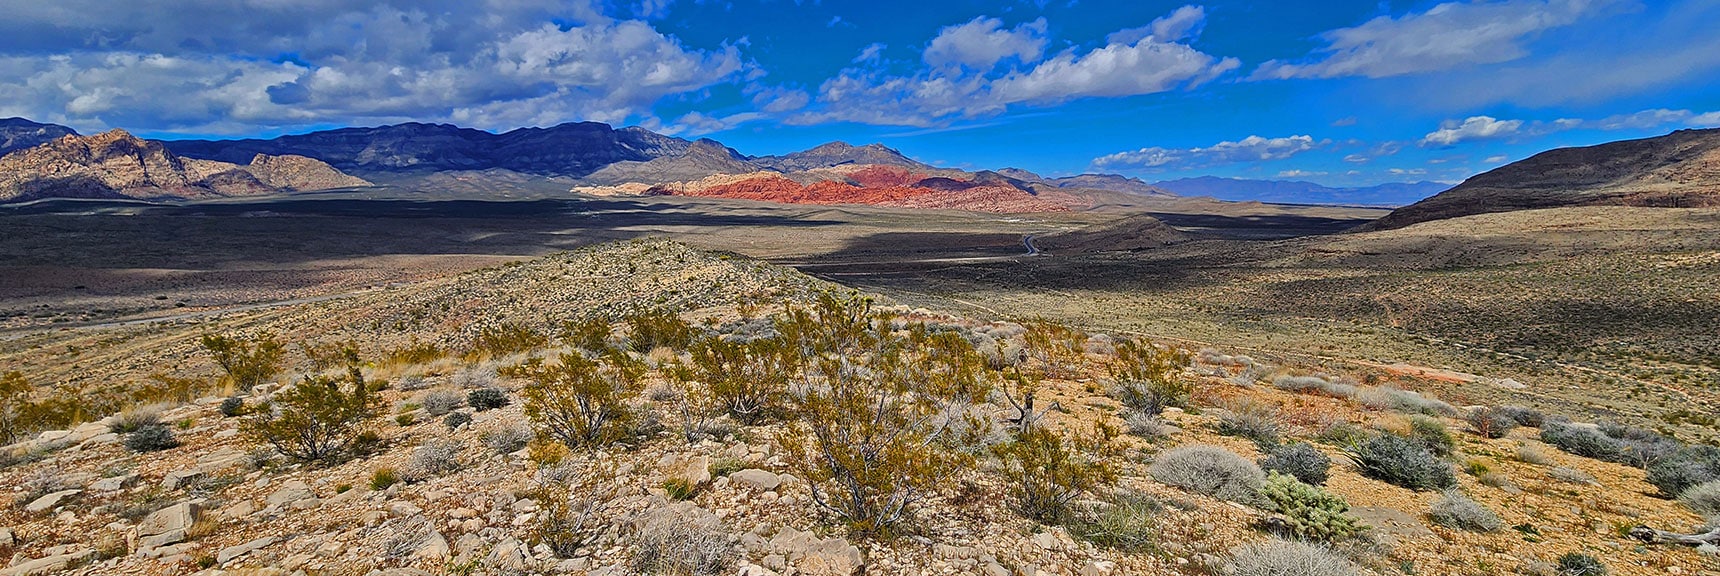 Larger View Toward Red Rock Canyon & La Madre Mts. Note Road Below to Right. | Western High Ridge | Blue Diamond Hill, Nevada